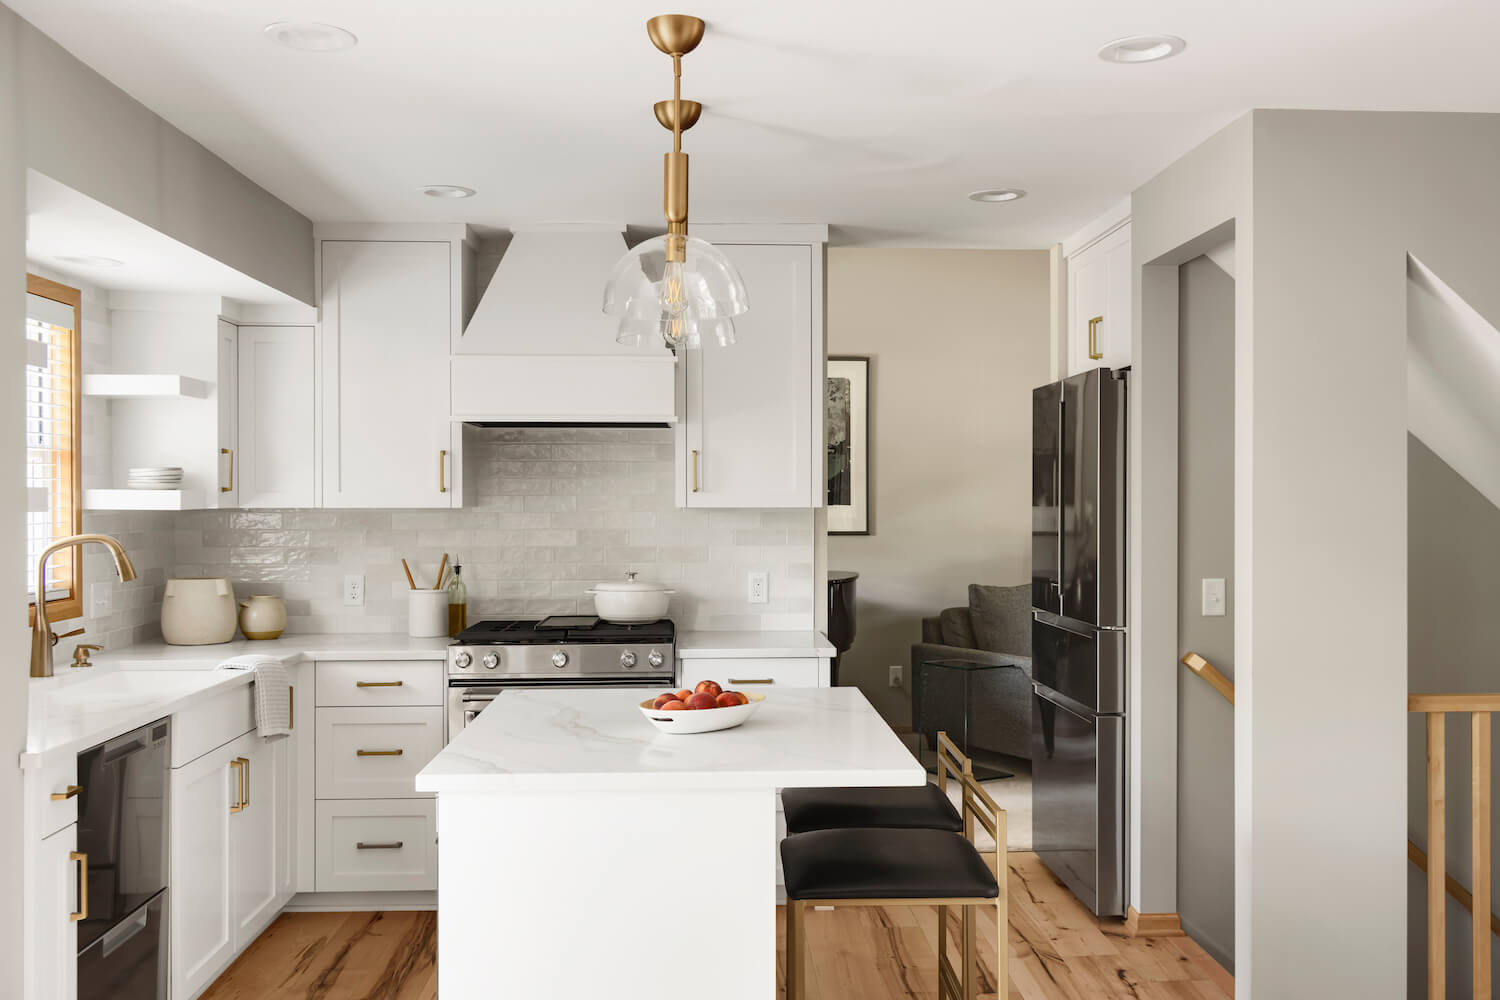 A white kitchen with stainless appliances